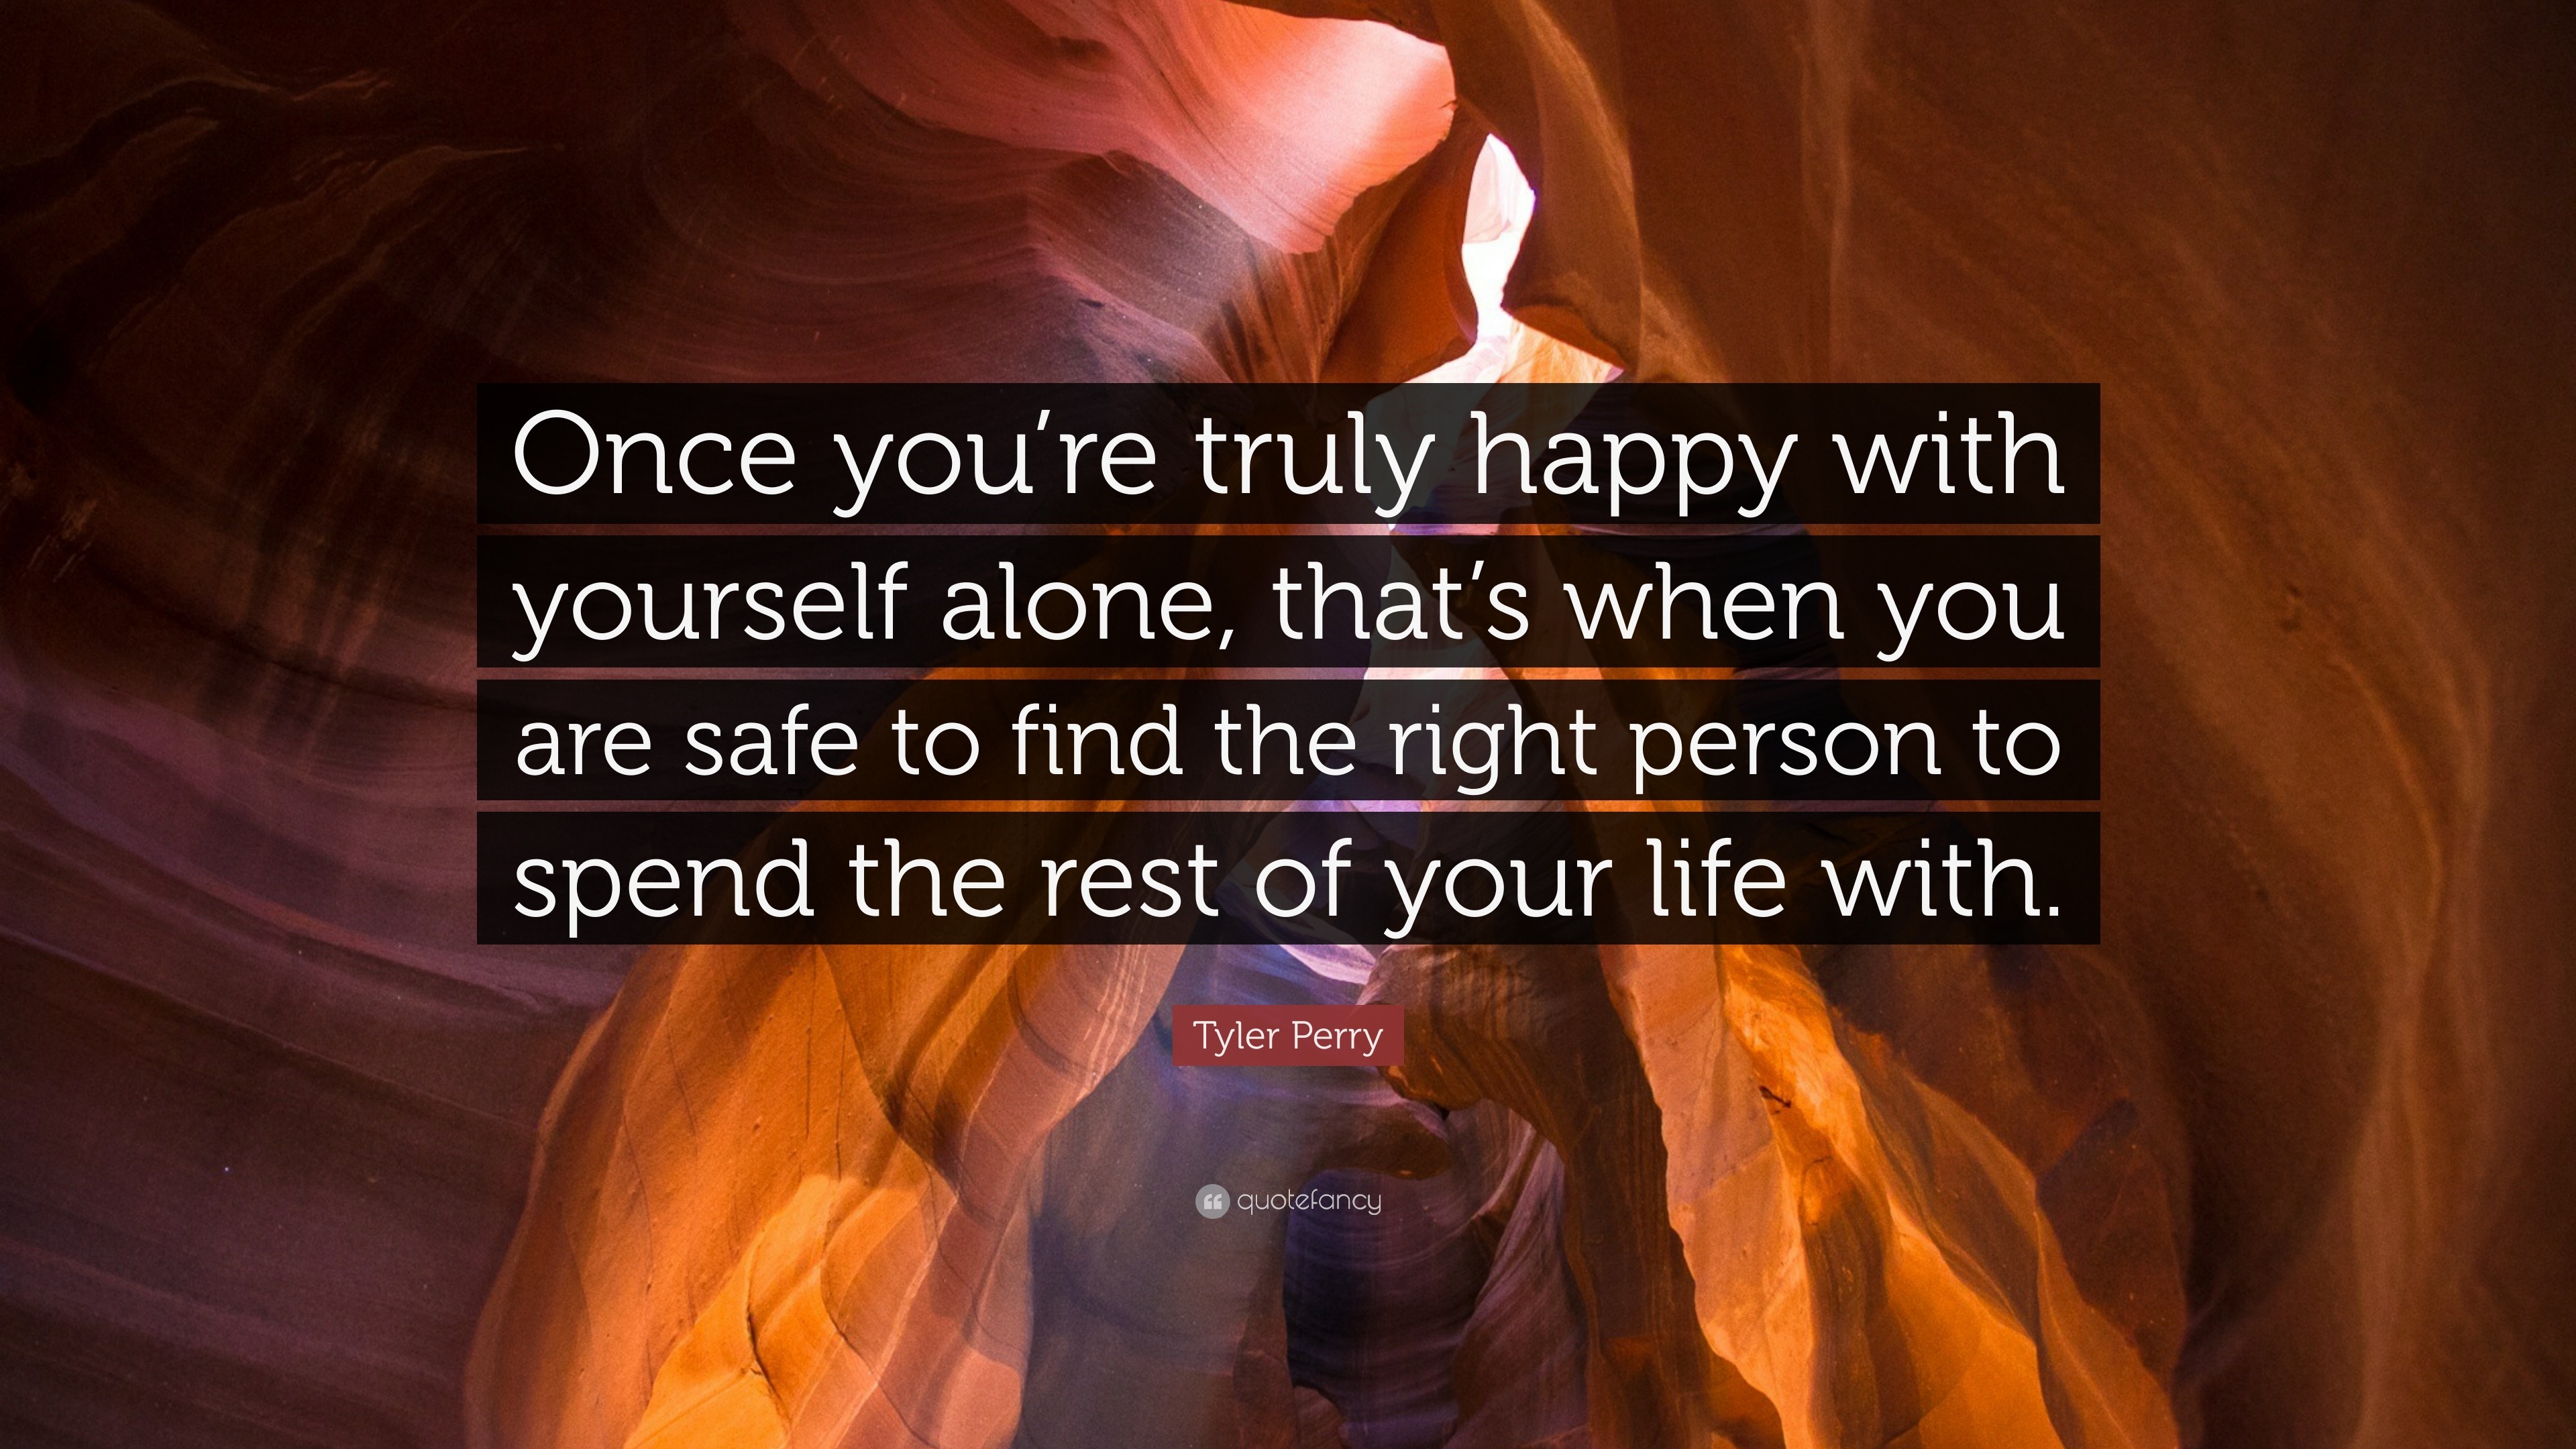 Tyler Perry Quote: “Once you’re truly happy with yourself alone, that’s ...